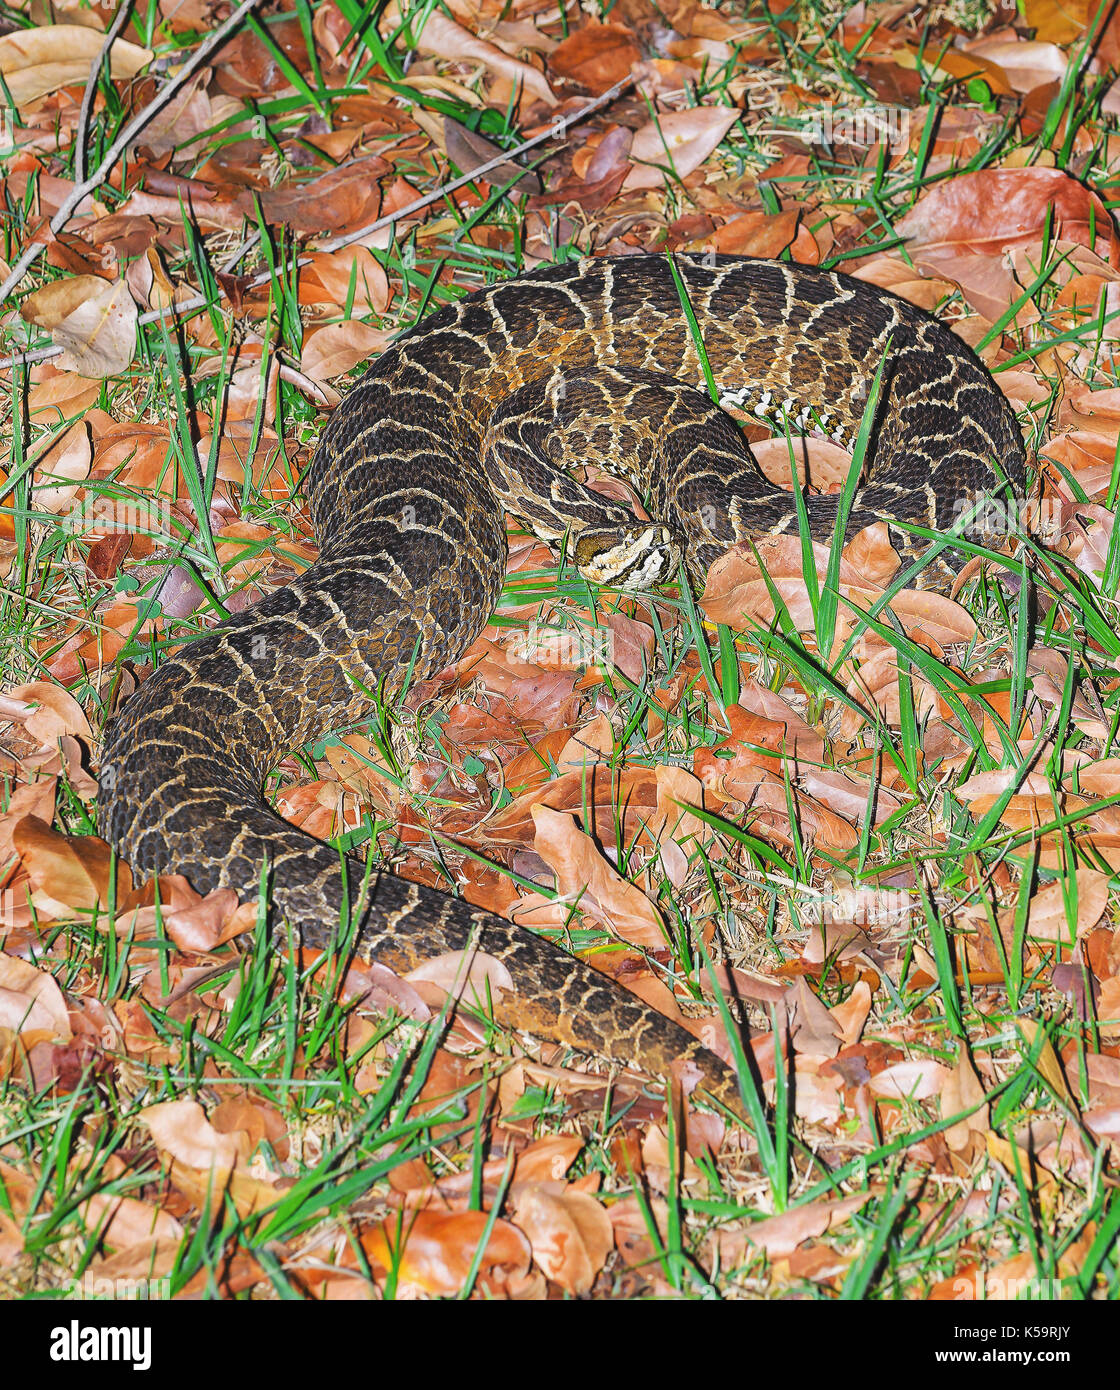 Snake Bothrops known as Jararaca in Brazil. Snake camouflaged between dry leaves and grass with a deadly venom. Stock Photo